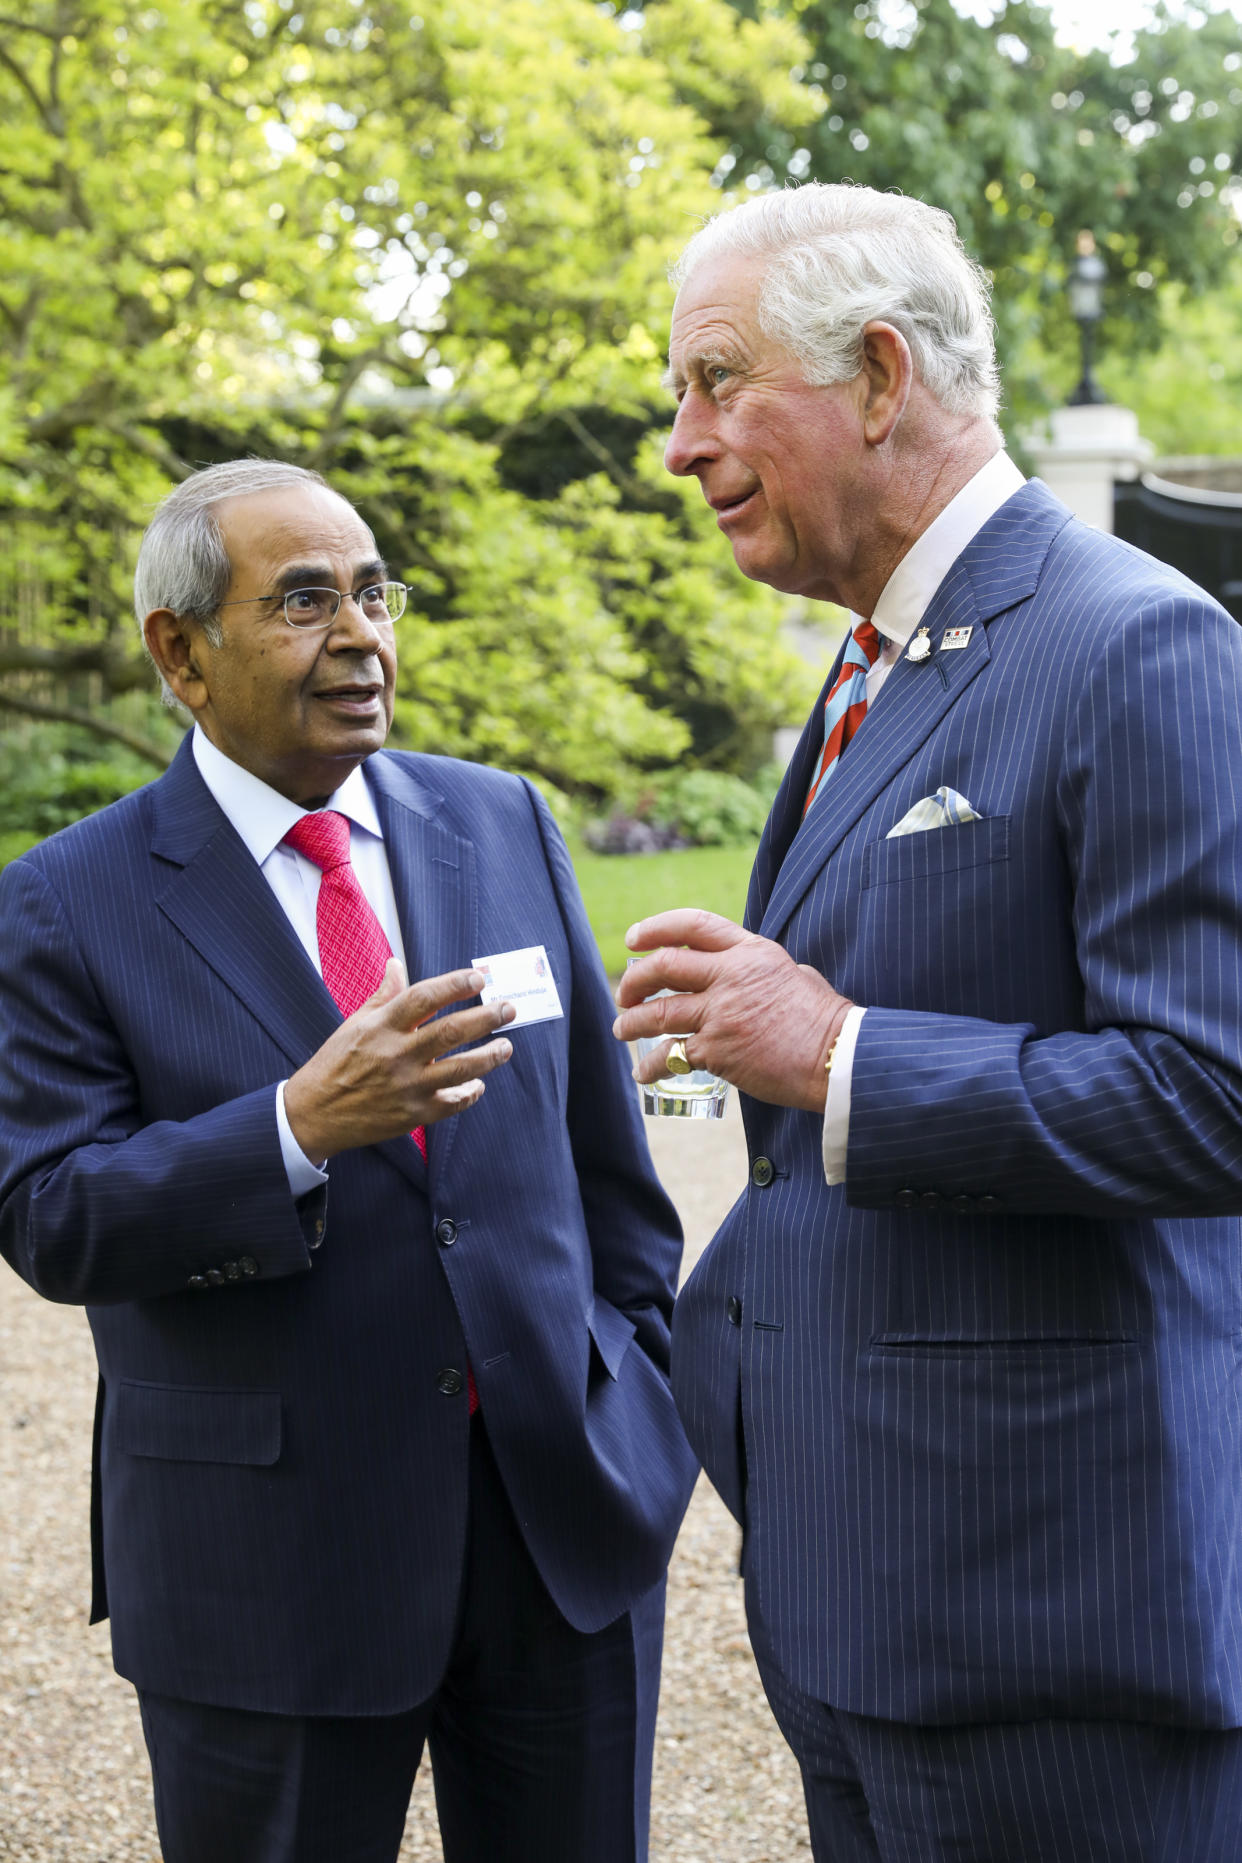 LONDON, ENGLAND - MAY 13: Prince Charles, Prince of Wales meets Gopichand Hinduja during a reception by charity Combat Stress to launch The At Ease Appeal at St James Palace on May 13, 2019 in London, England. (Photo by Tristan Fewings - WPA Pool / Getty Images)